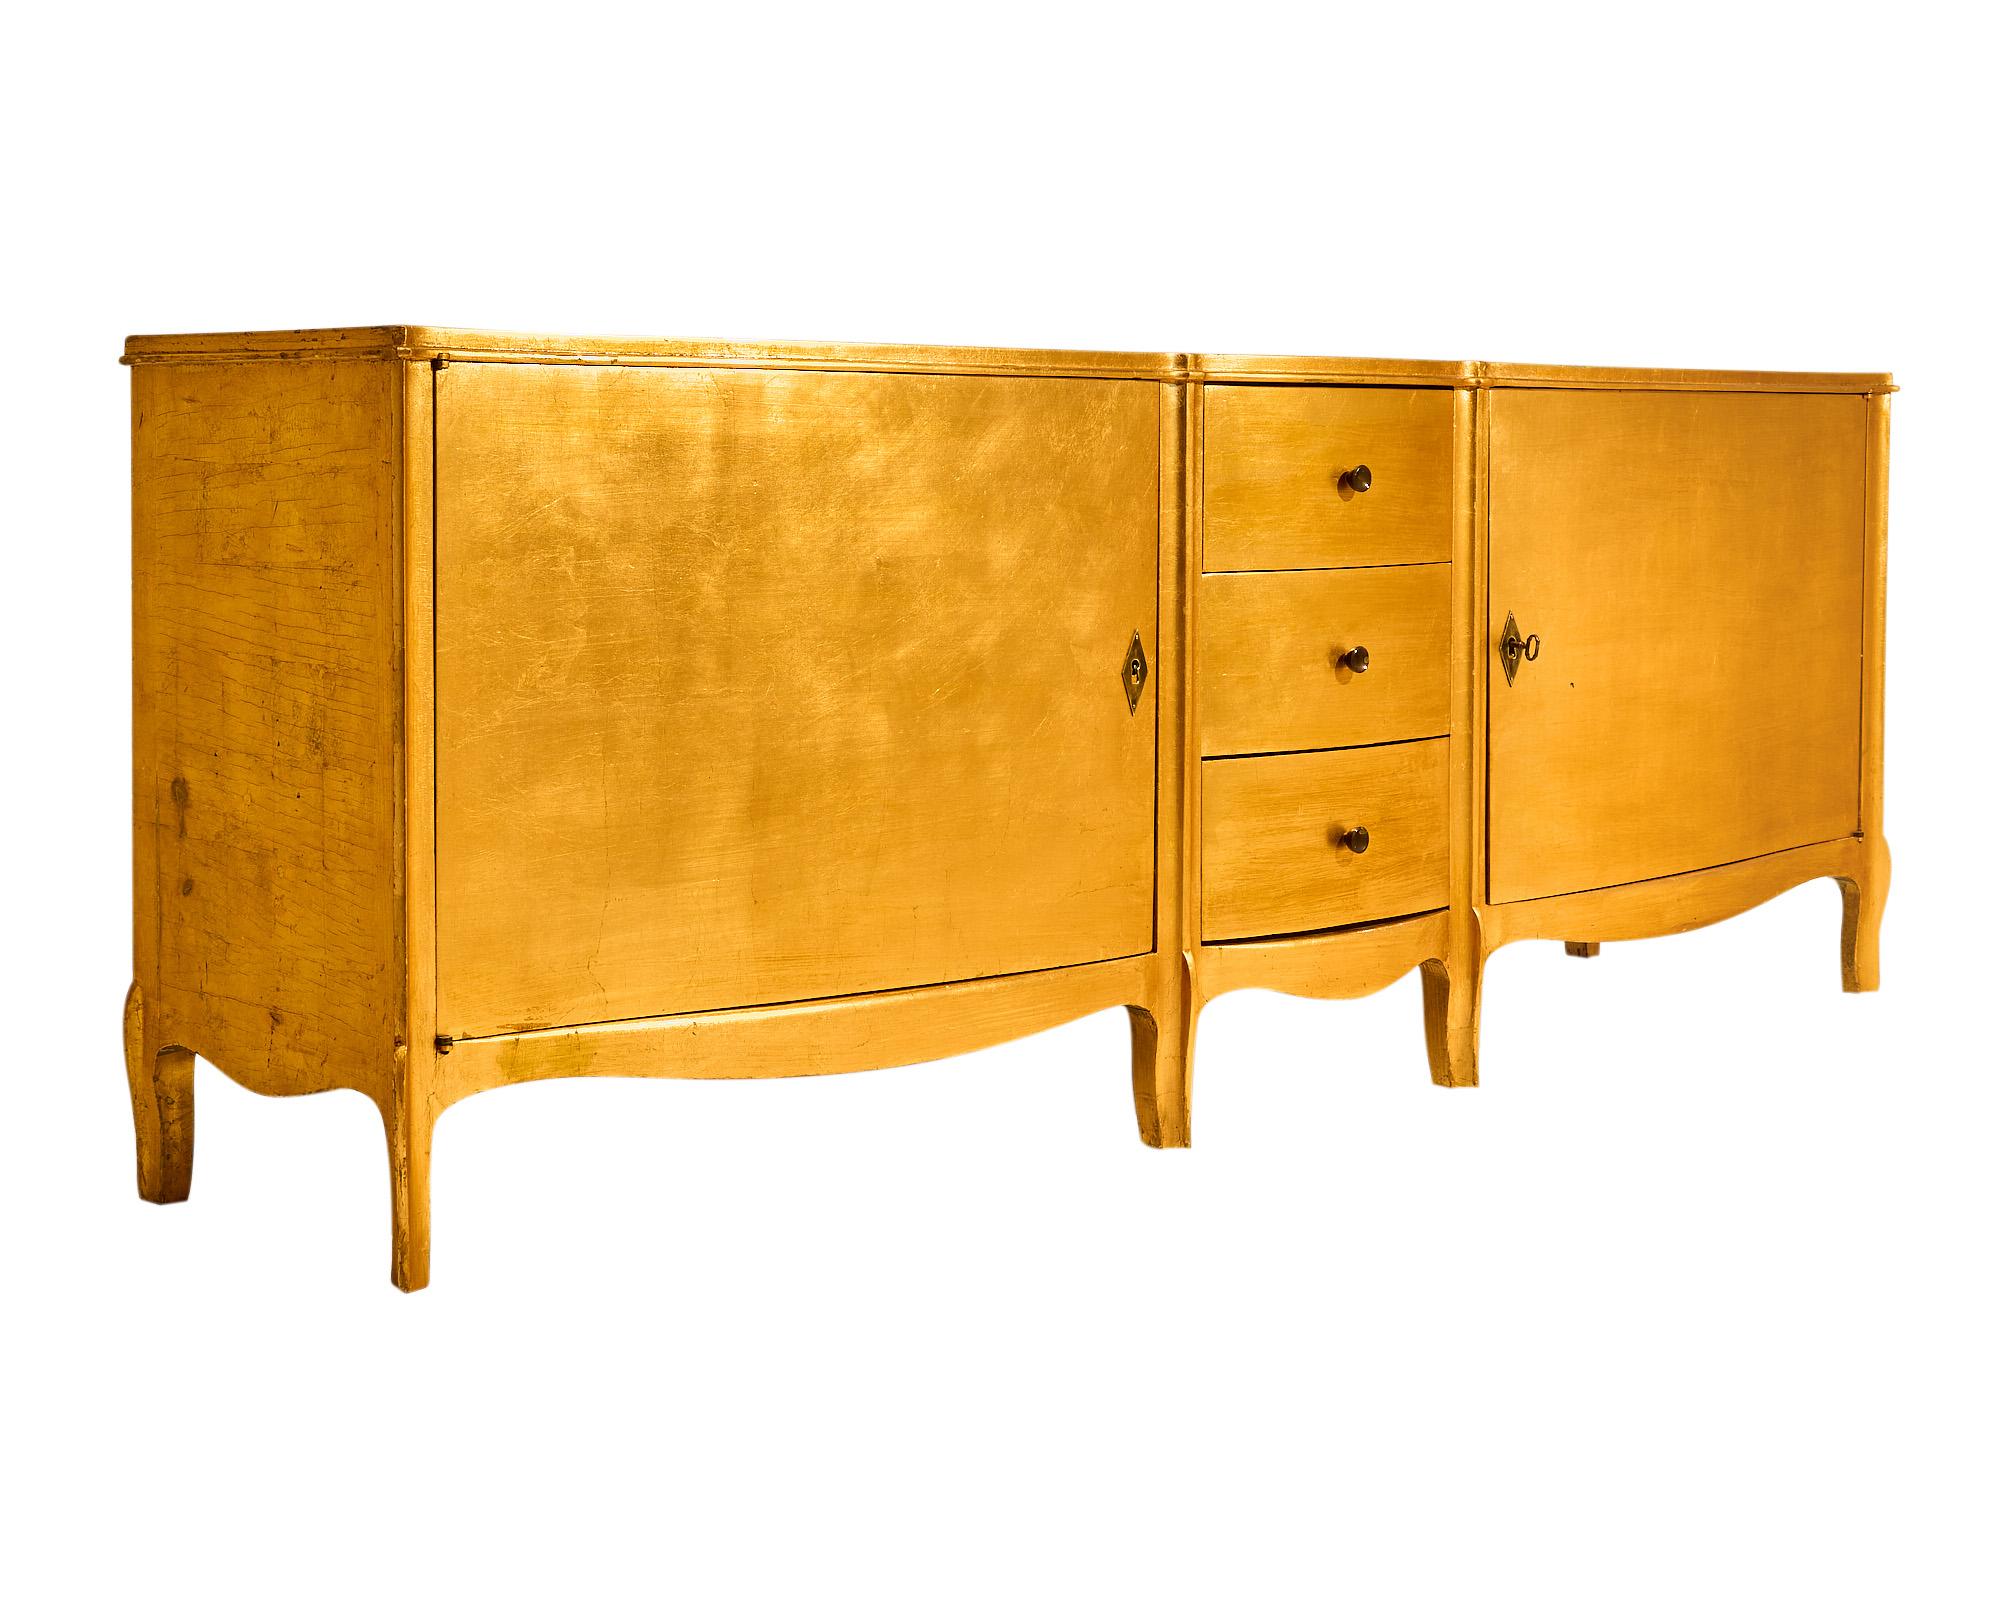 Buffet / enfilade designed by Jean Royere, the leading designer of Maison Gouffé in Paris, from the Art Deco period in France made of beech wood that has been finished with a gold leaf lacquer. There are two doors that open to interior shelving and